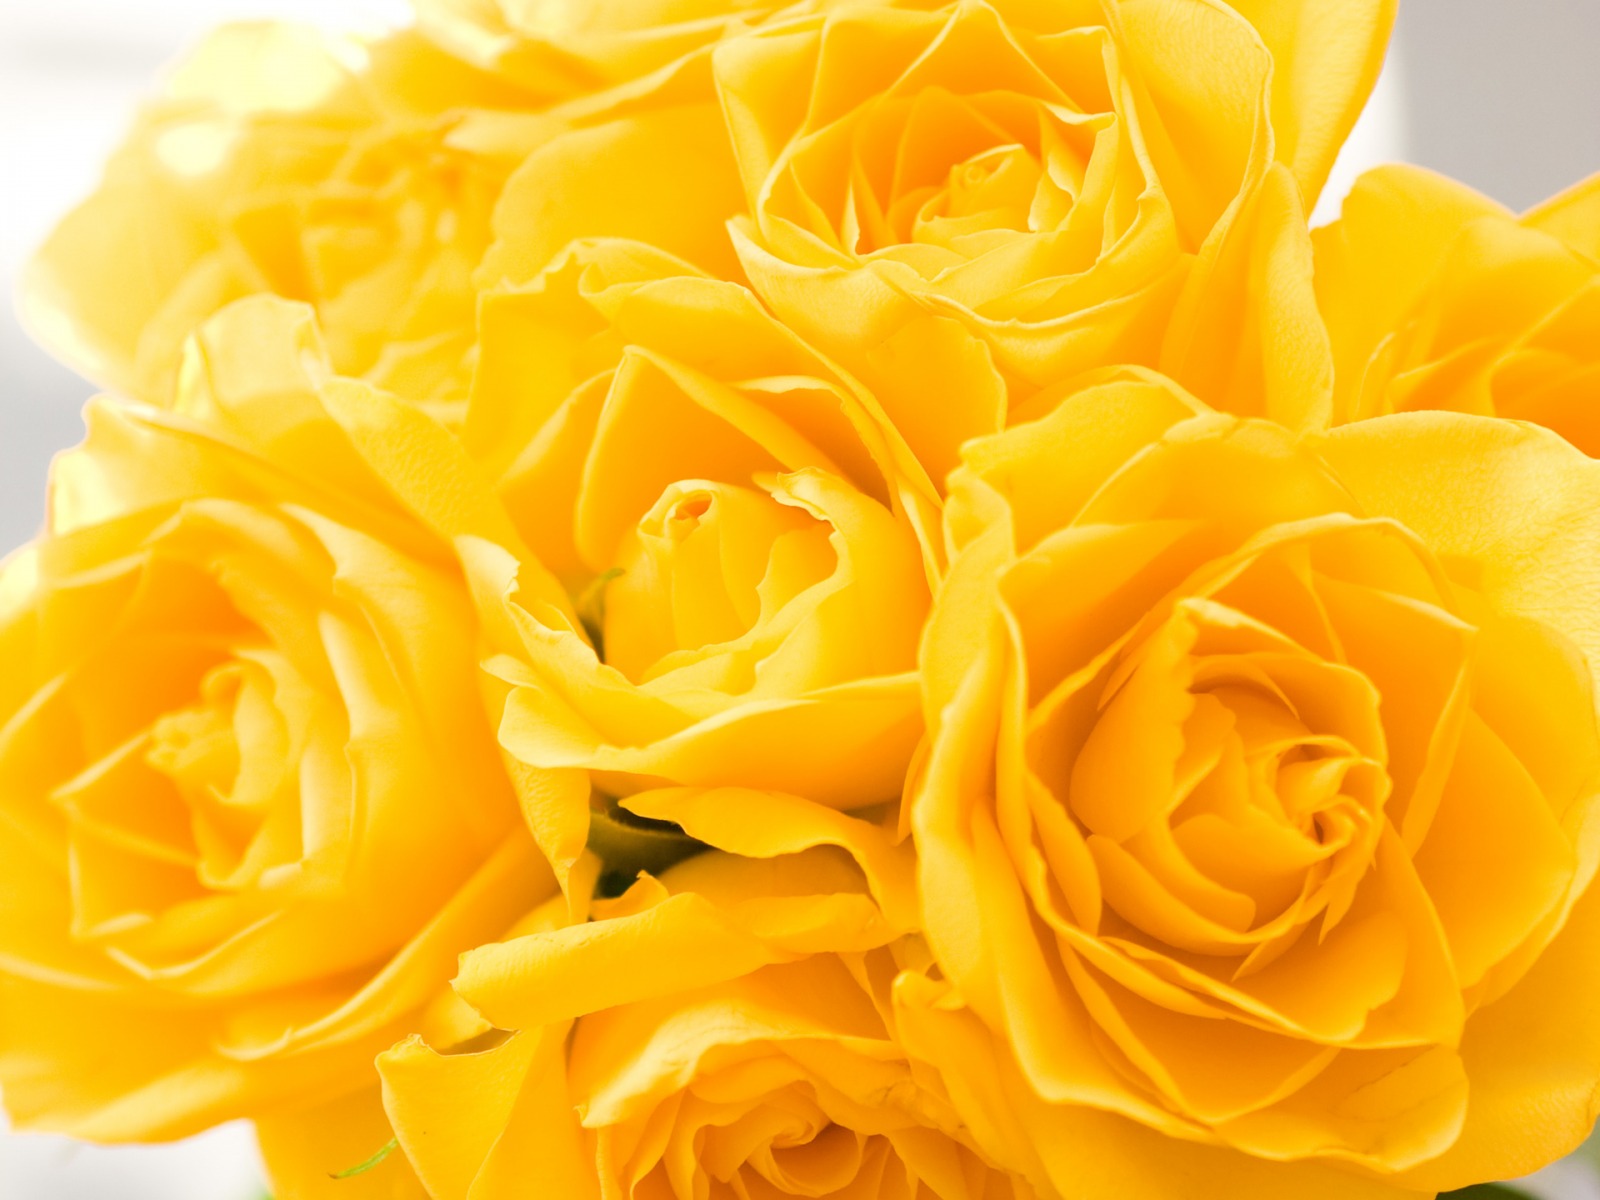 Beautiful Roses And Sunflower Wallpapers